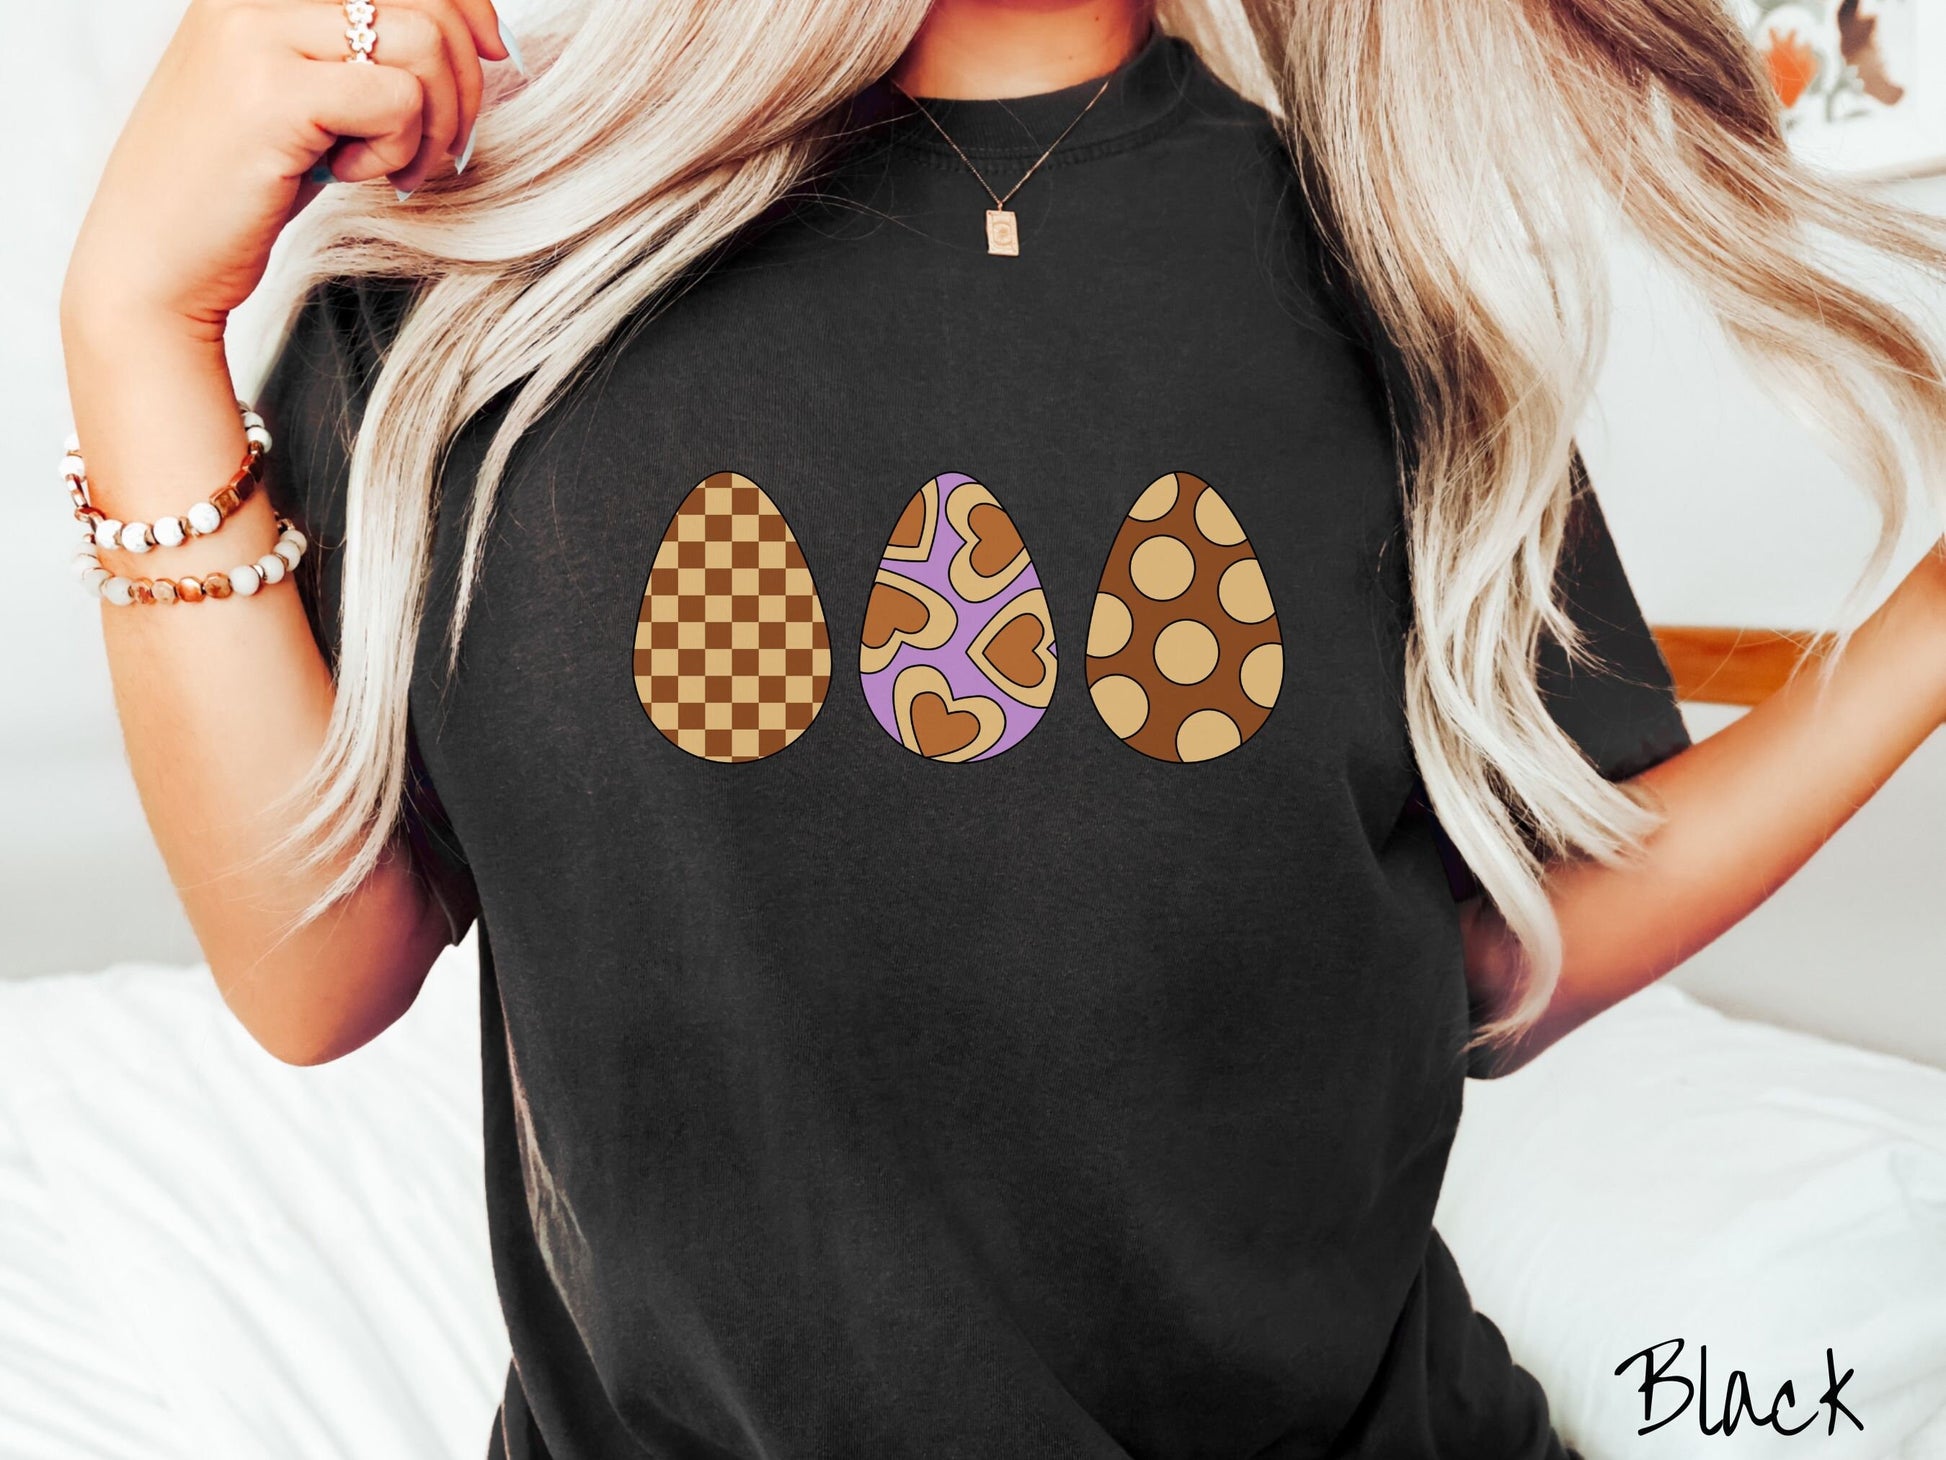 A woman wearing a cute, vintage black colored shirt with three Easter eggs. The left egg has a light yellow and brown checkerboard pattern, the middle is purple with light yellow brown hearts, and the right is brown with light yellow circles.